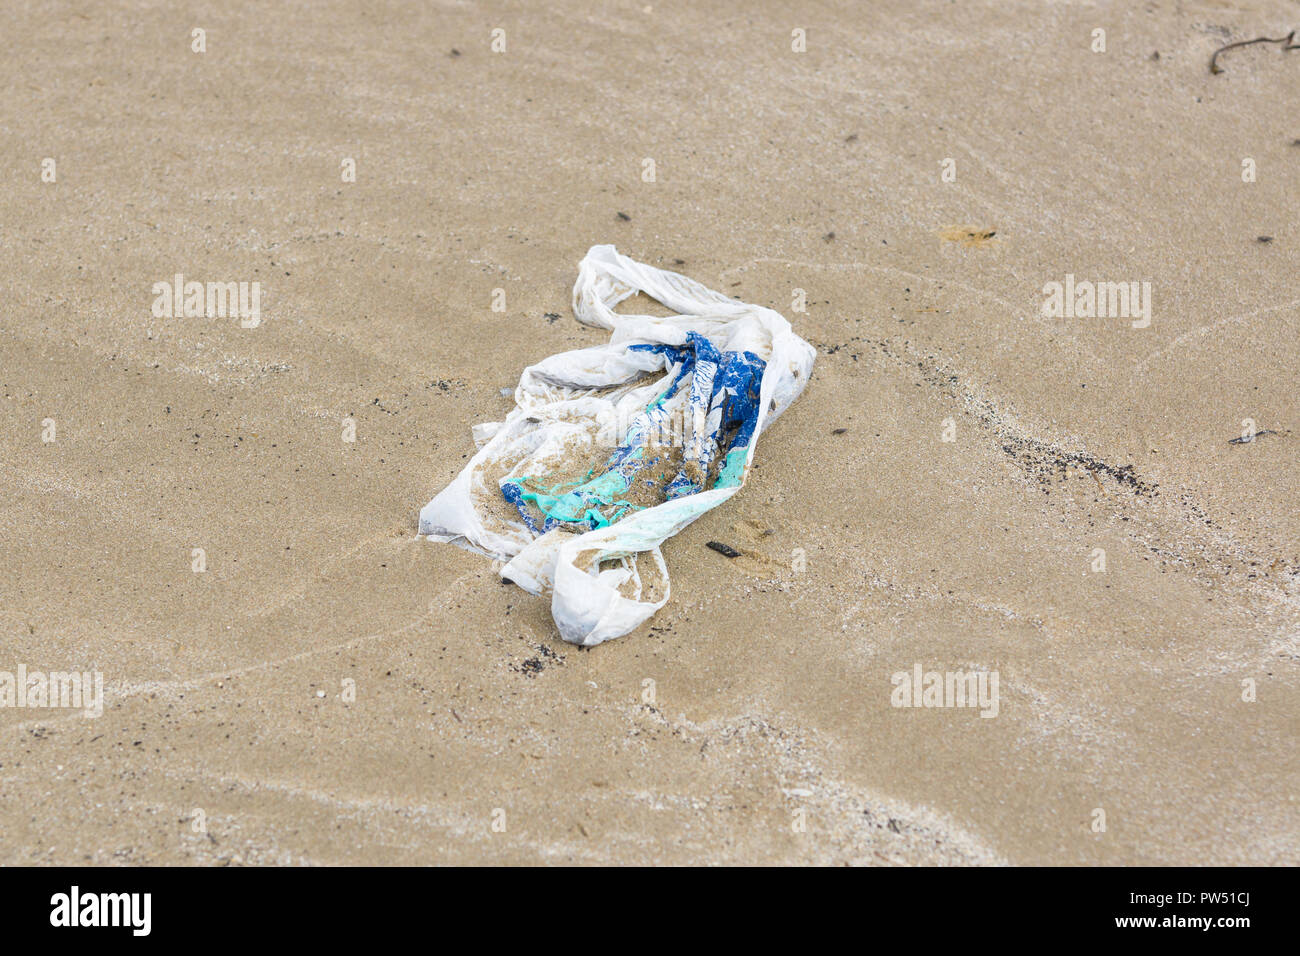 Single use plastic shopping bag washed up on a beach and part buried in the sand an example of the garbage in the oceans around the world Stock Photo